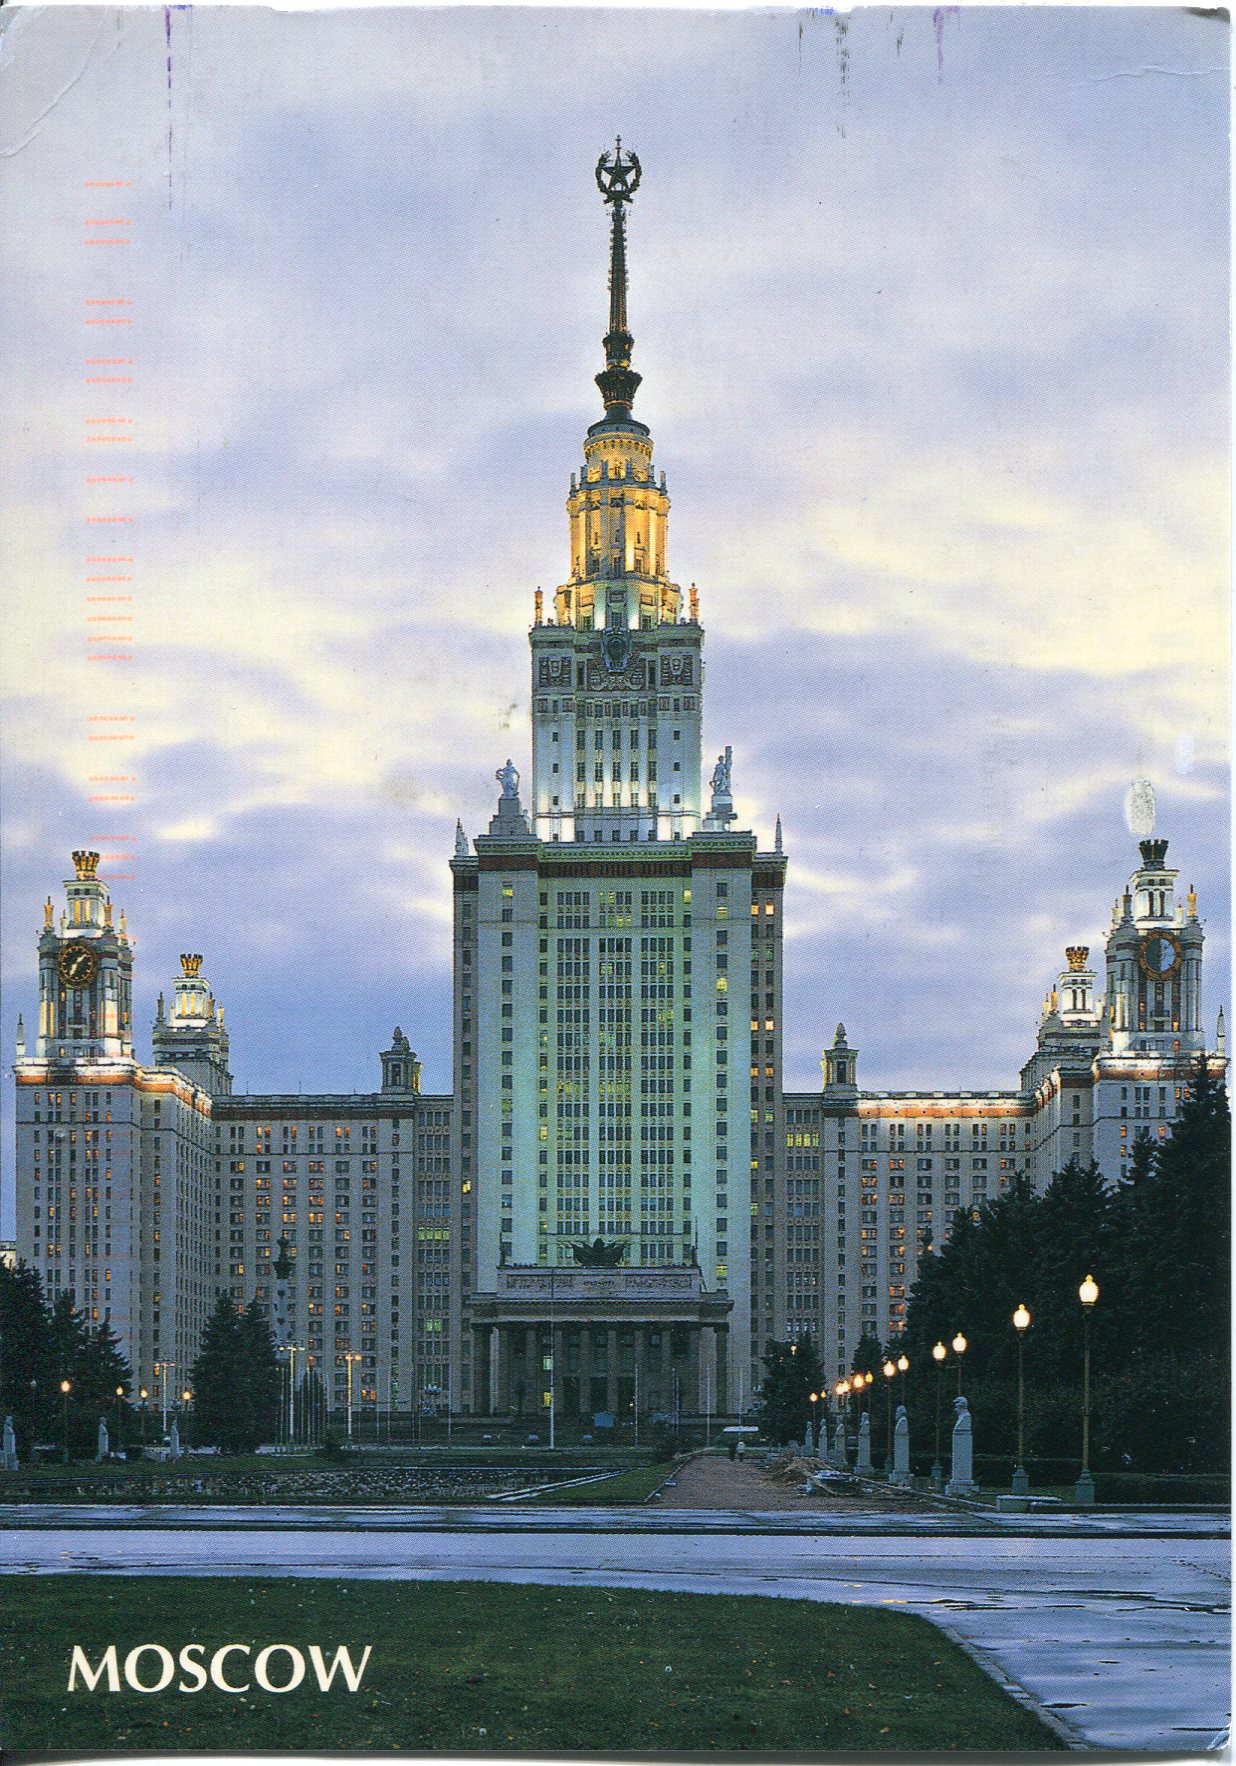 Main Russian University And Spend 99